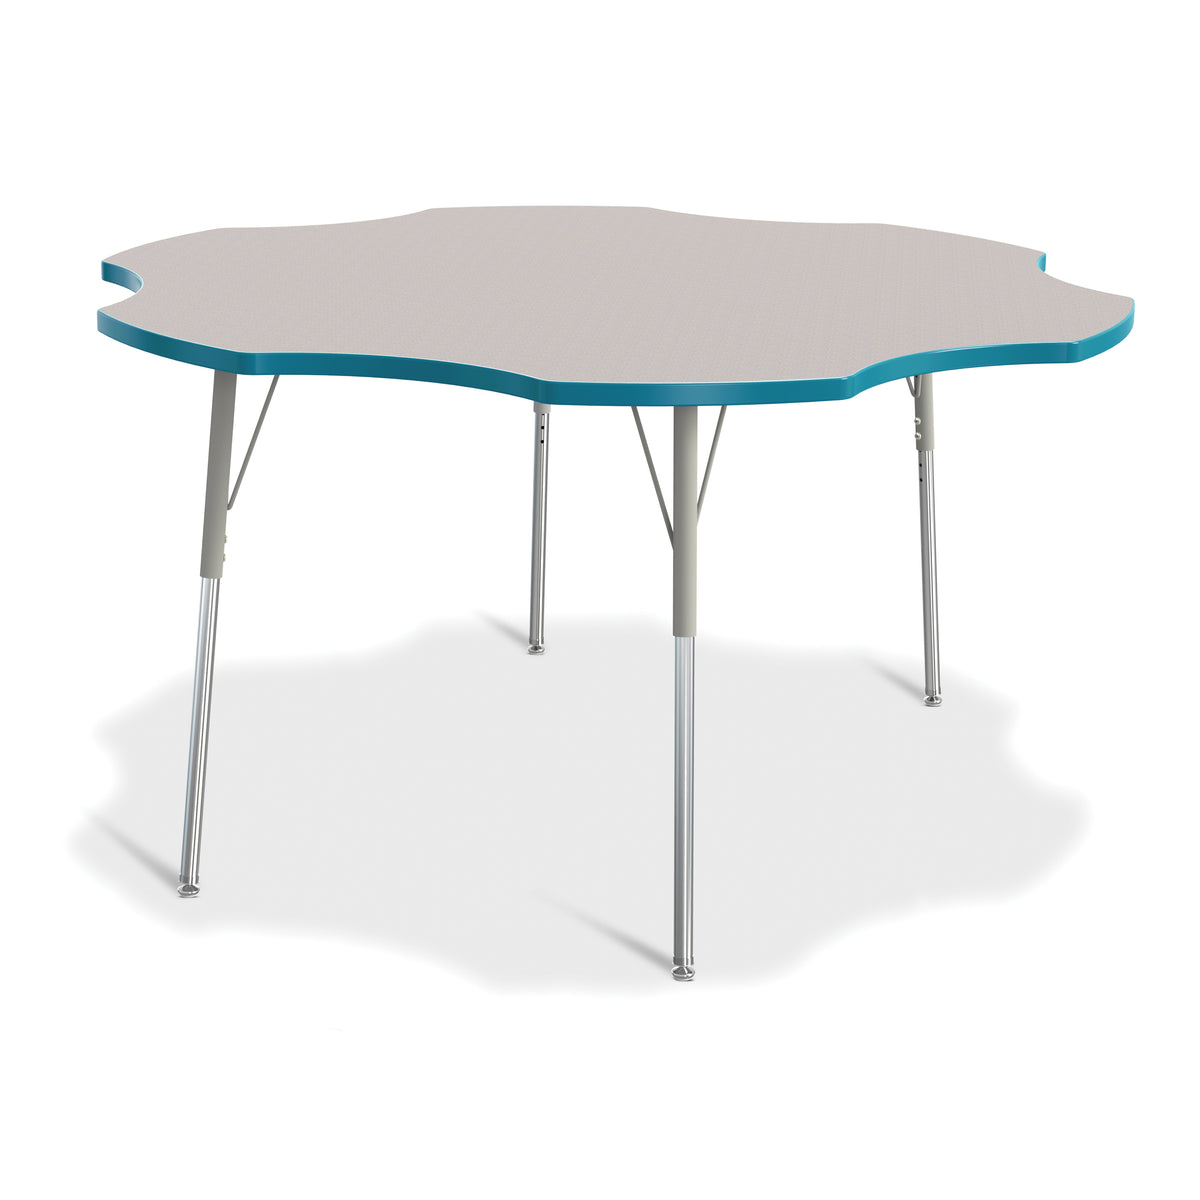 6458JCA005, Berries Six Leaf Activity Table - 60", A-height - Freckled Gray/Teal/Gray